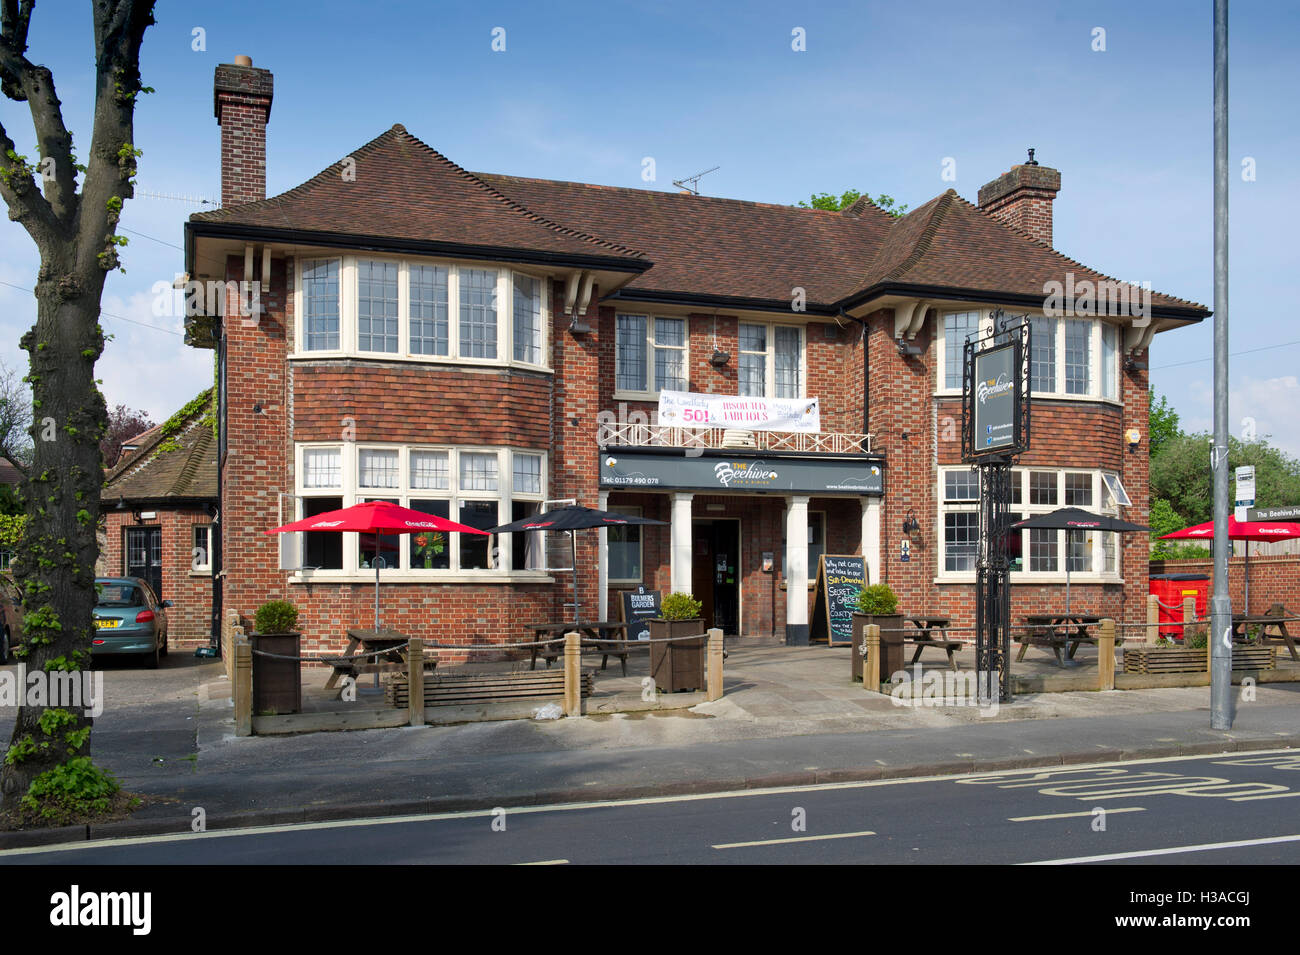 The Beehive, a public house in Henleaze, Bristol, UK. Stock Photo